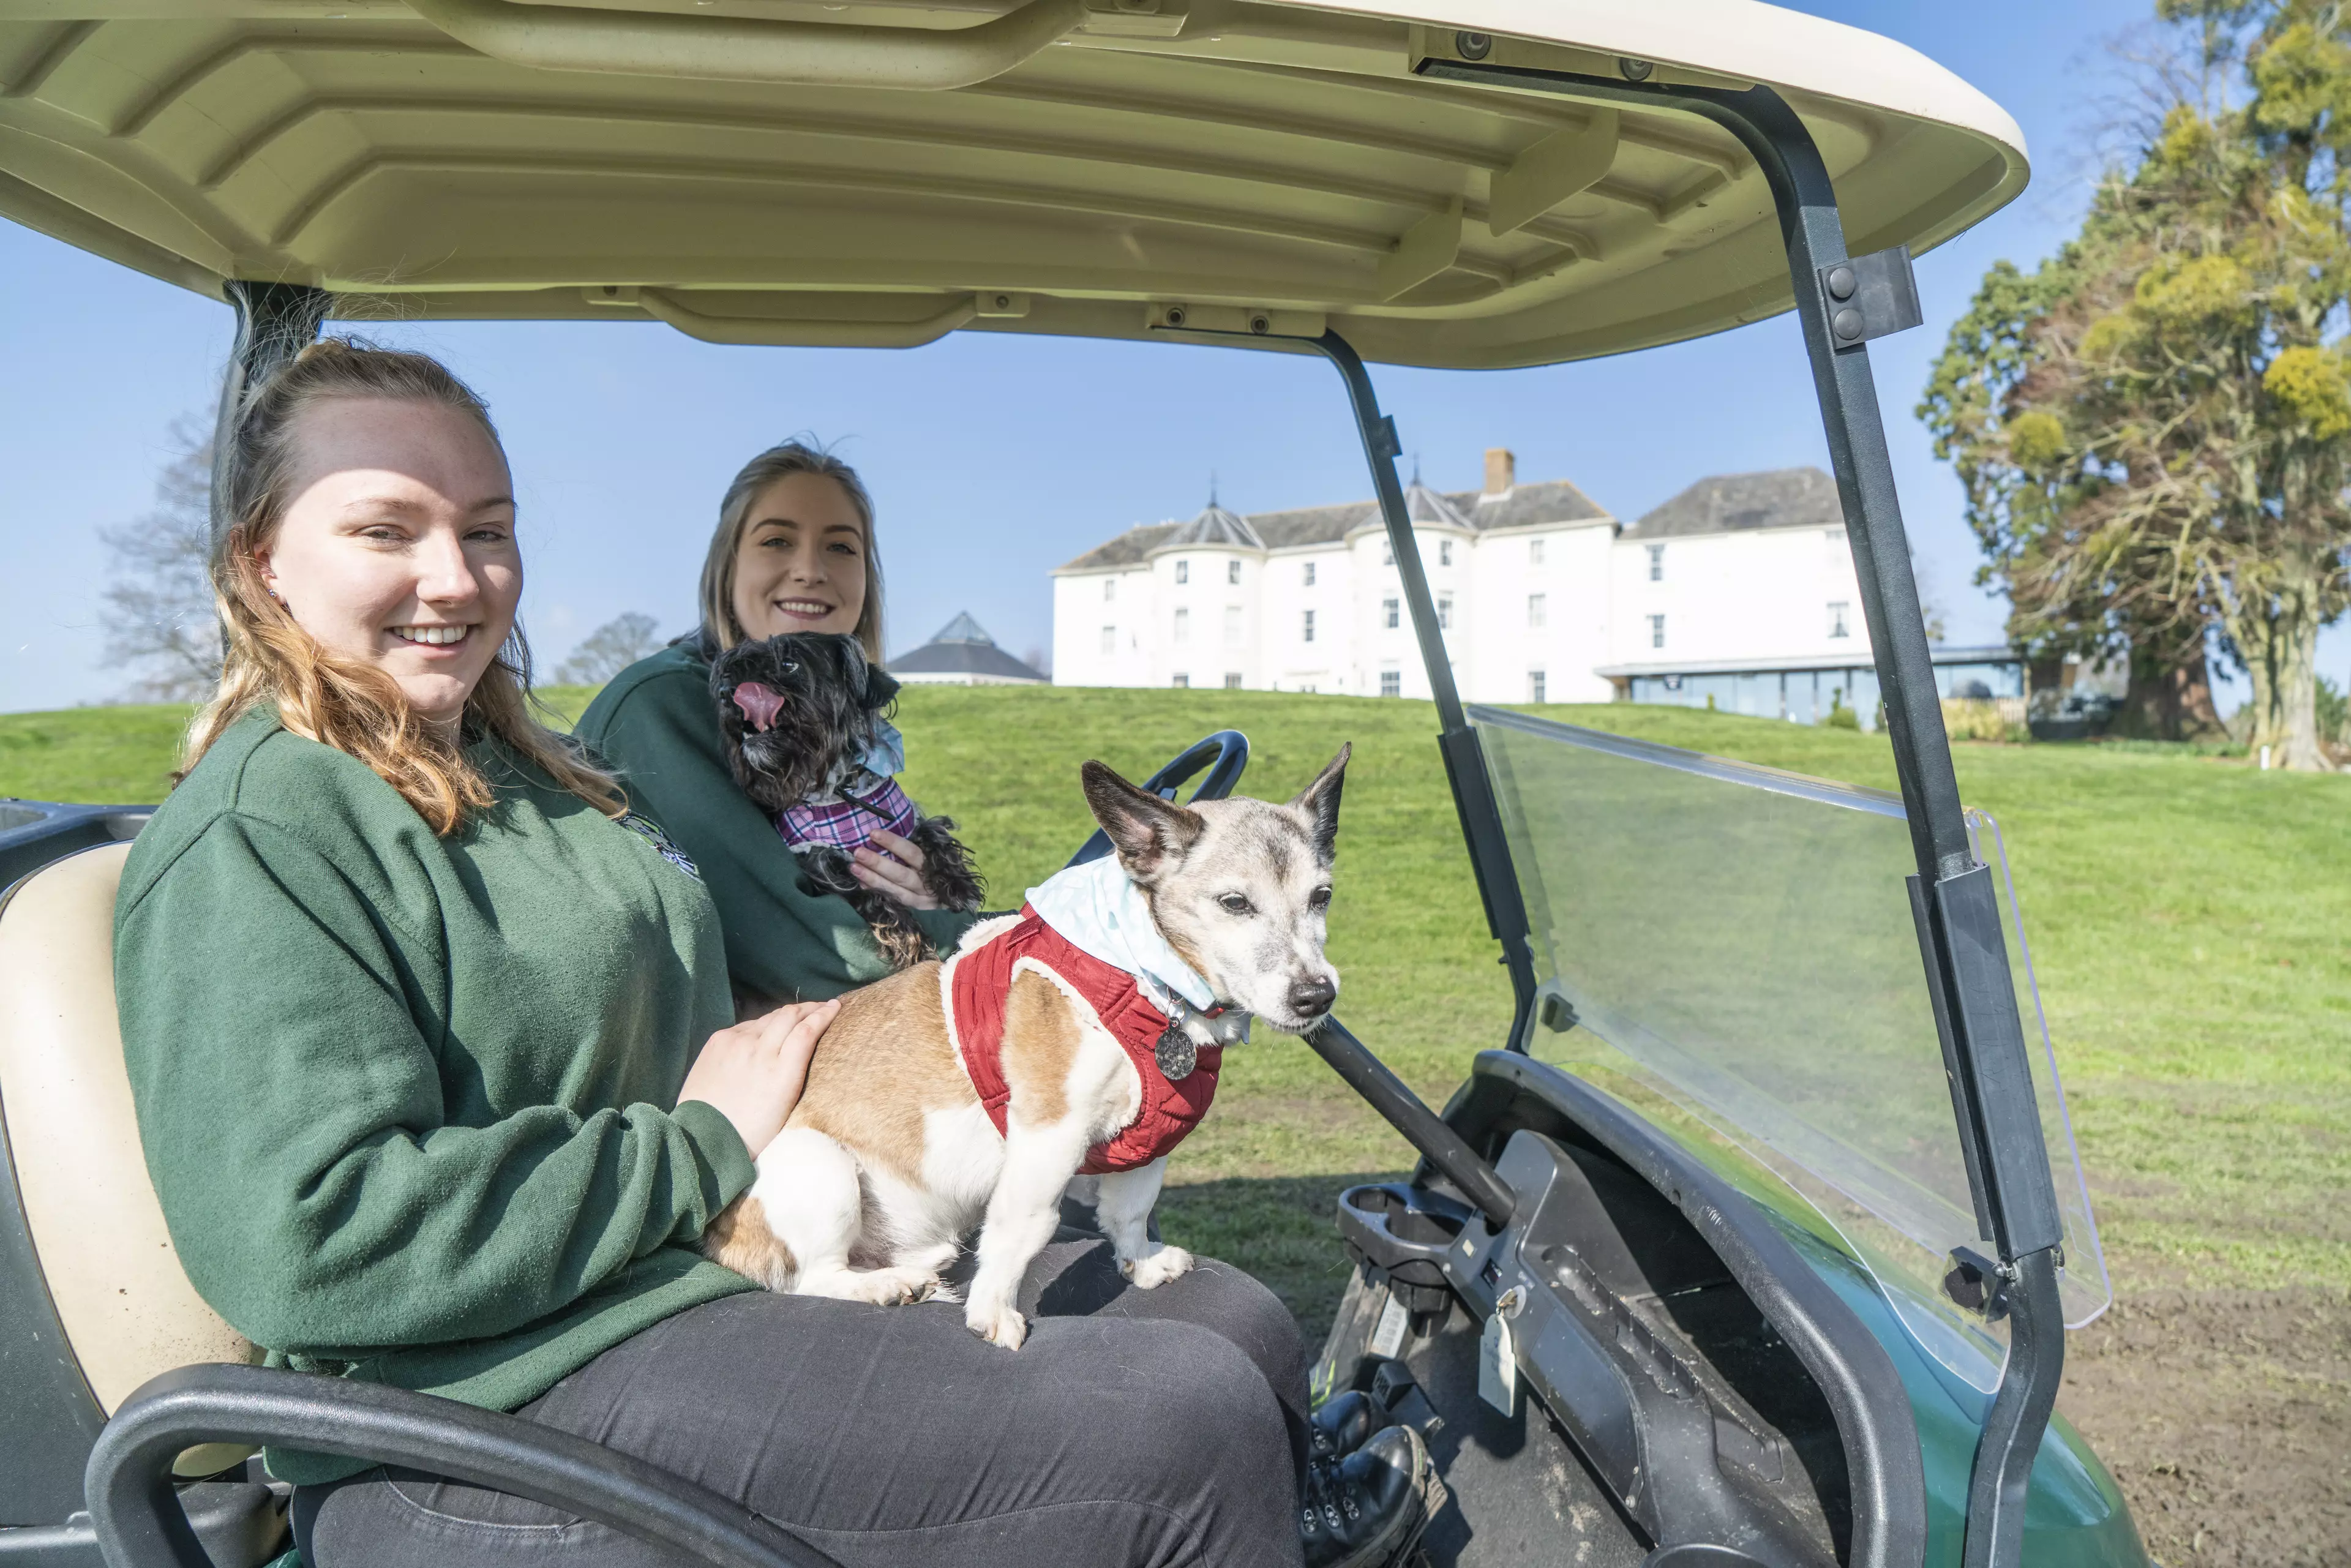 The dogs hitched a ride on a golf buggy back to the hotel after a run around the grounds (